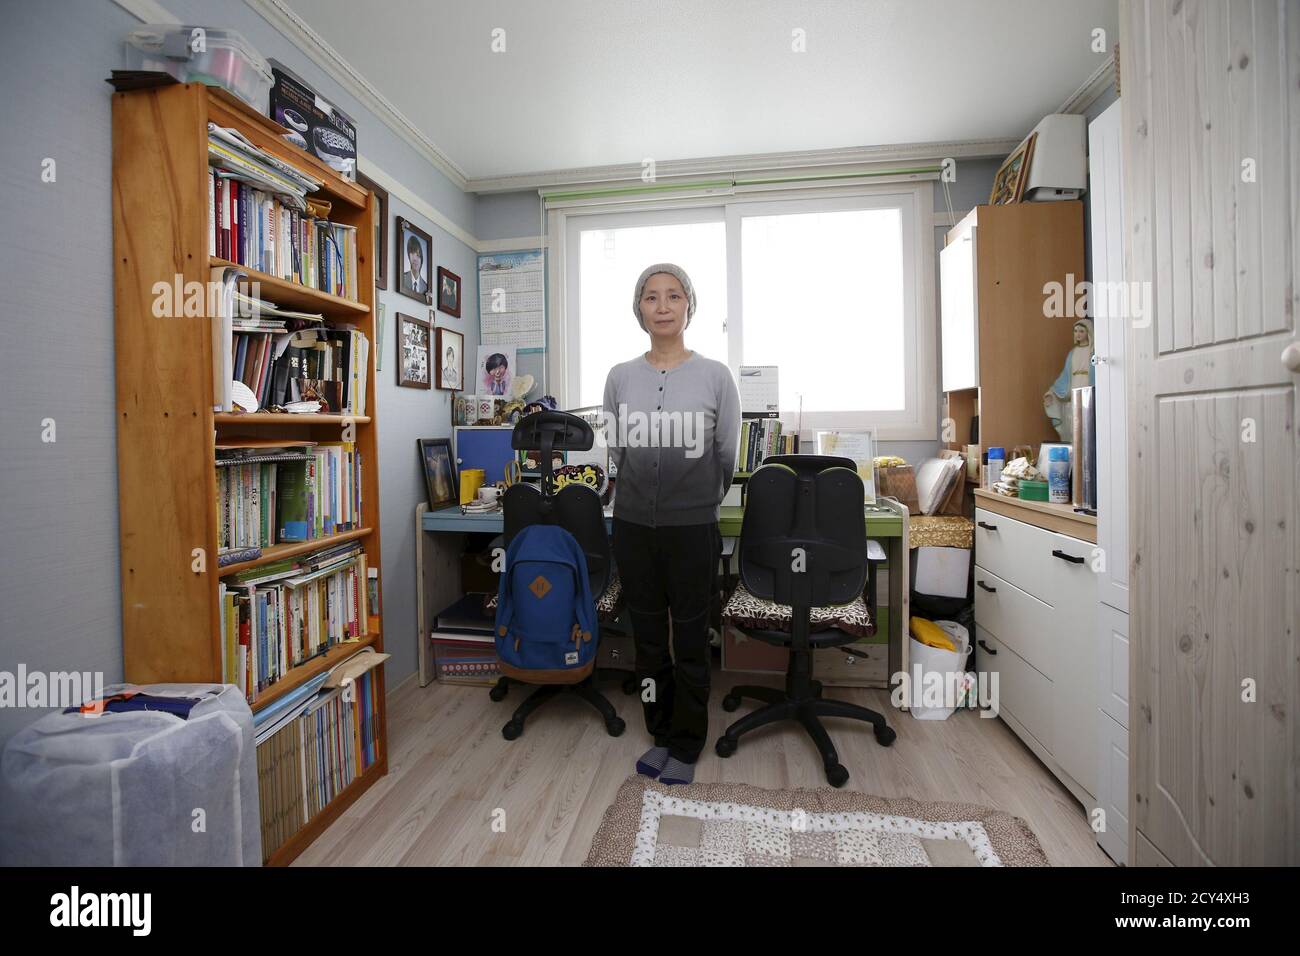 Jung Hye-suk, mother of Park Sung-ho, a high school student who died in the Sewol ferry disaster, poses for a photograph in her son's room in Ansan April 7, 2015. Jung said: 'Good children have died because of adults’ faults. The Sewol disaster taught us about the problems of our society and adults should make efforts to fix them, although it’s too late. We have to strive to prevent any reoccurrence of this disaster and to build a culture that cherishes human life. Our children didn’t blame society. They tried hard to save each others’ lives and worried about their families. Don’t we have to l Stock Photo